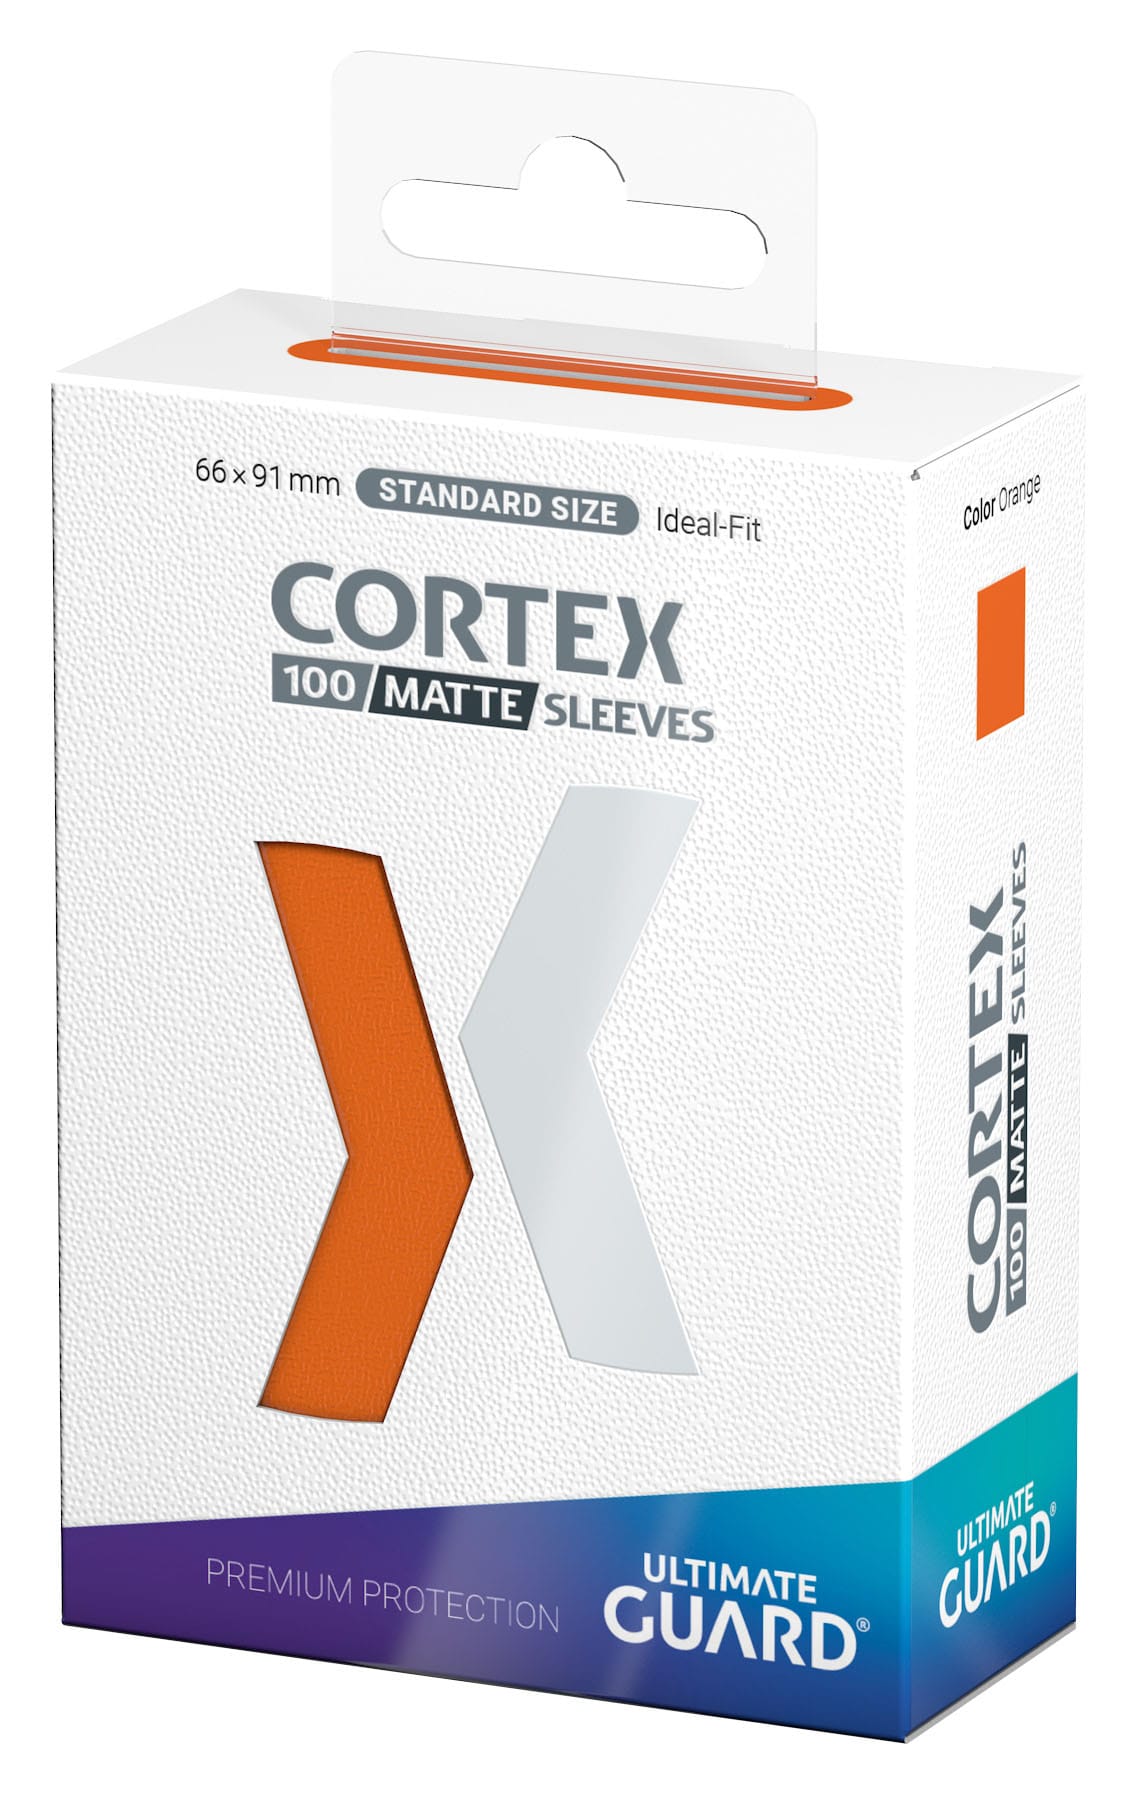 Ultimate Guard - Cortex Sleeves - Standard Size (100)